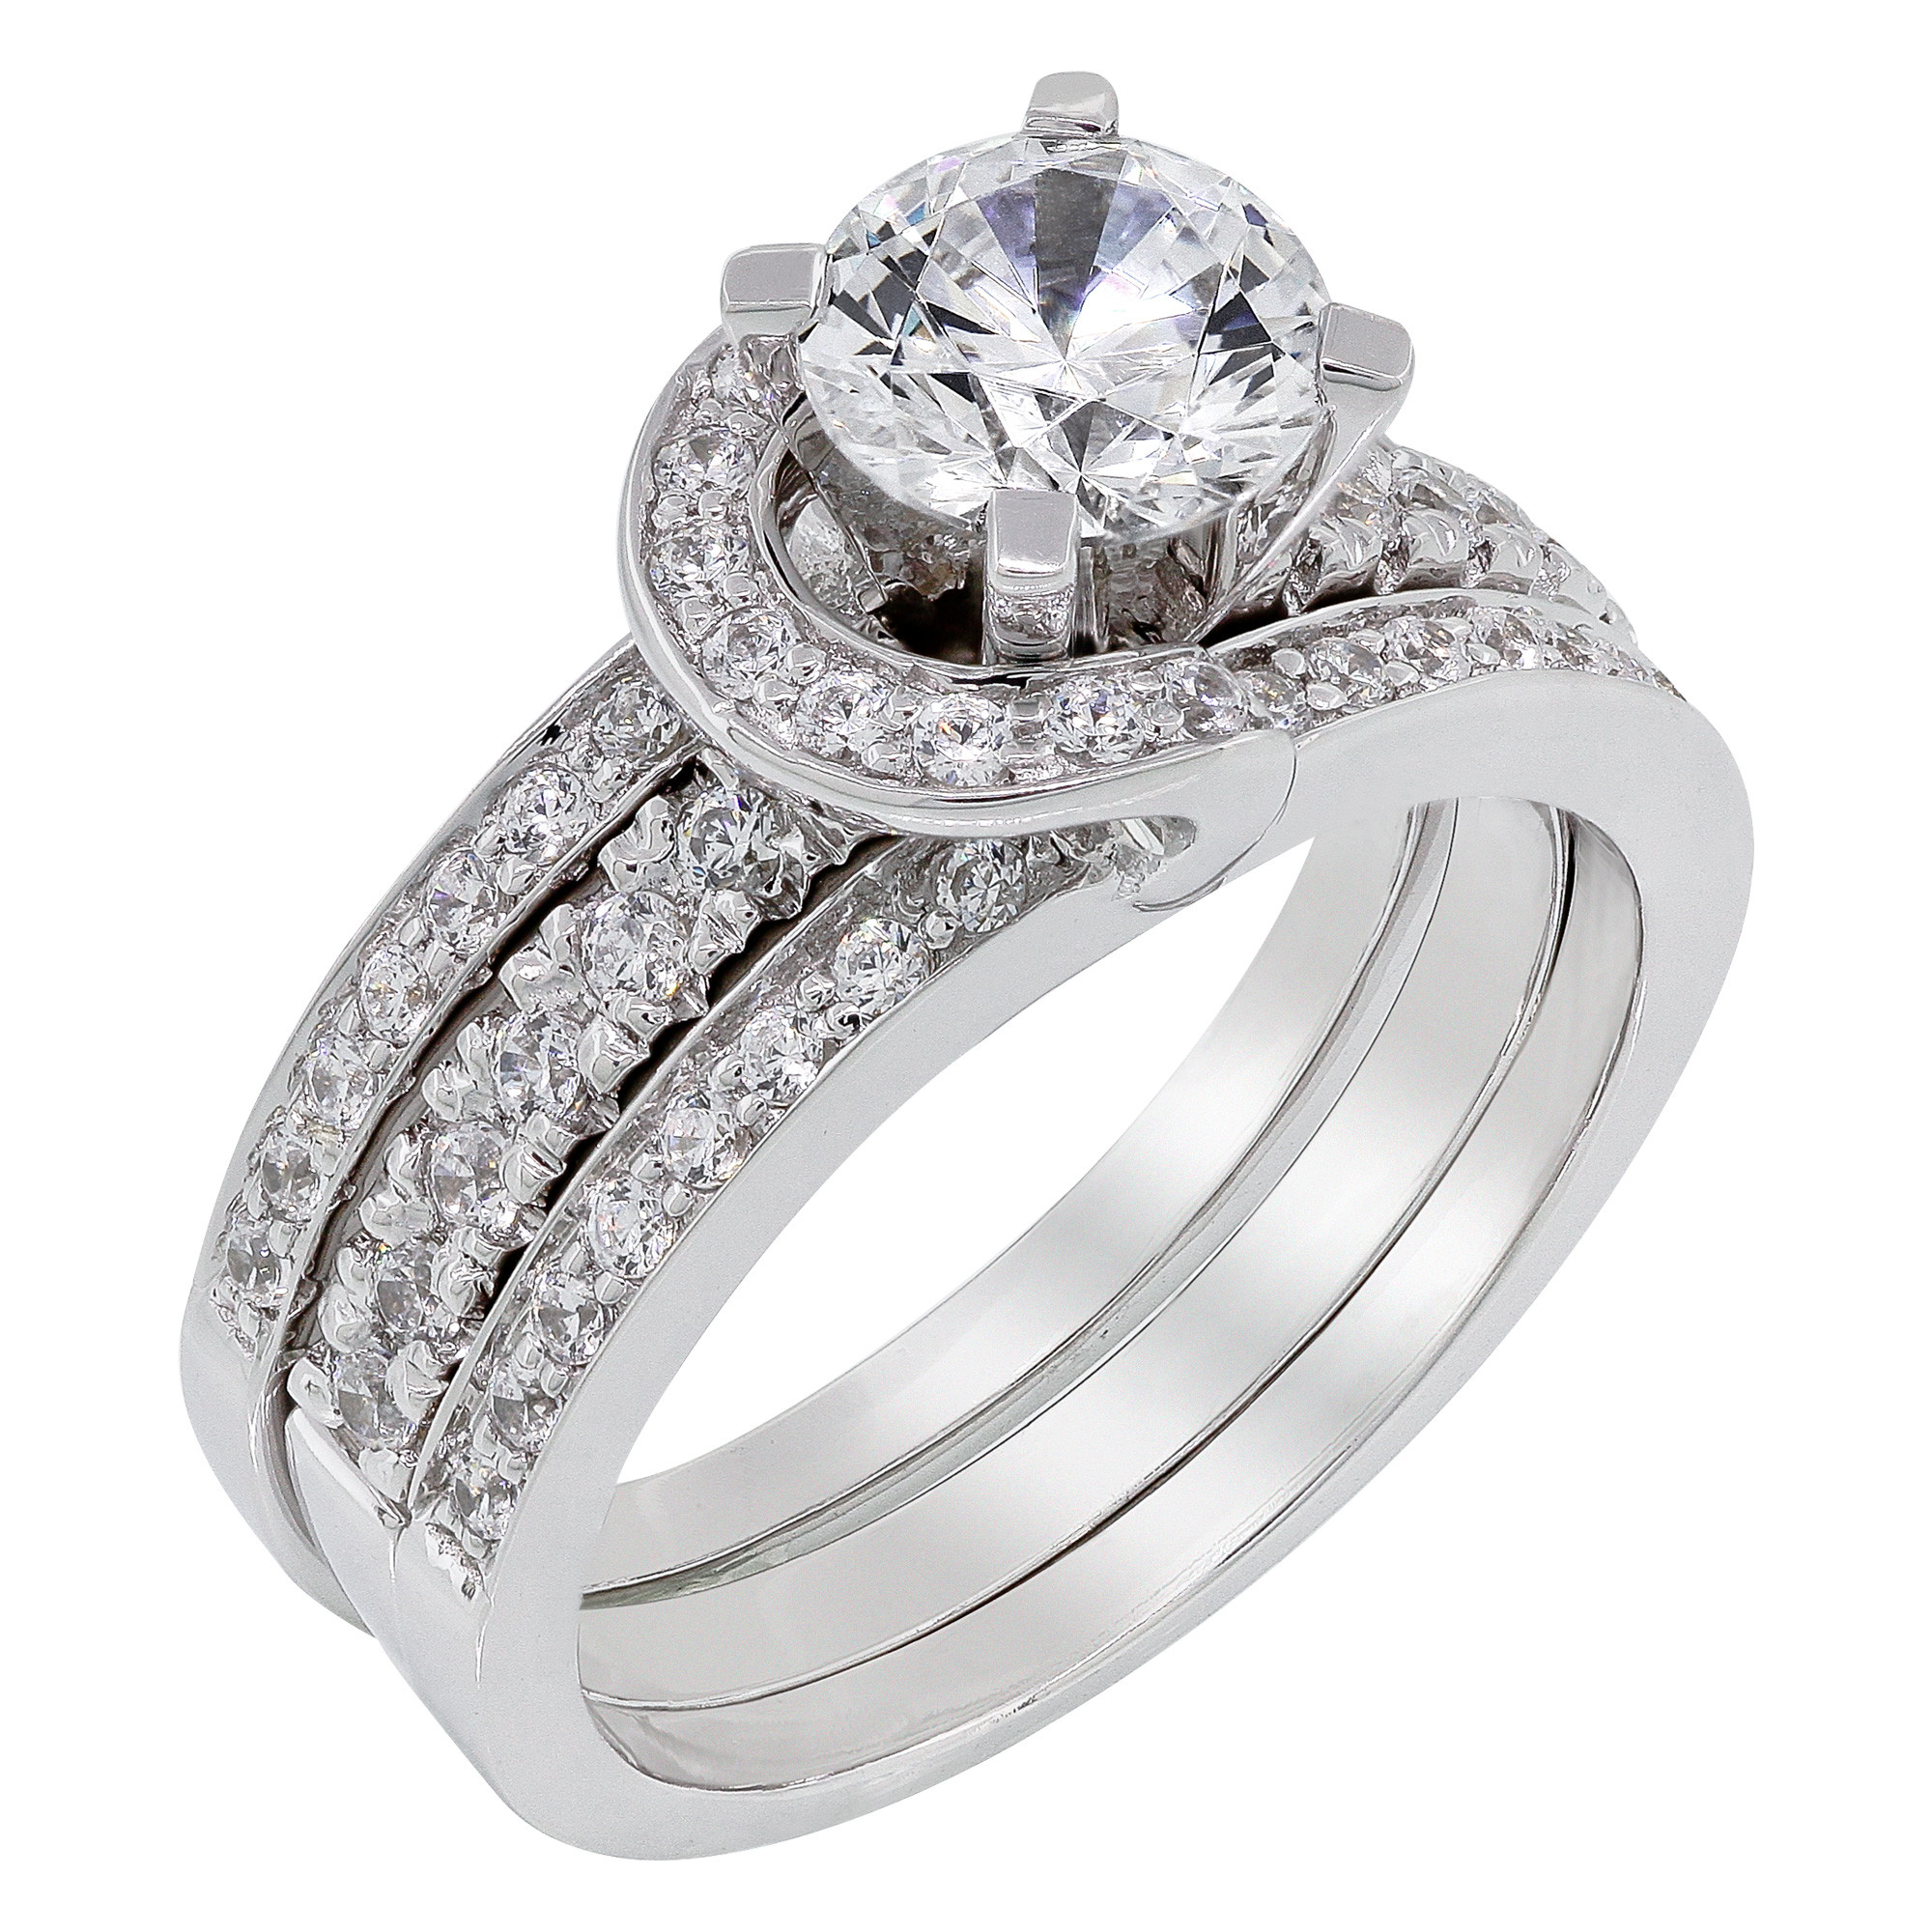 Pics Of Wedding Rings
 Diamond Nexus Introduces New Engagement Ring Collection